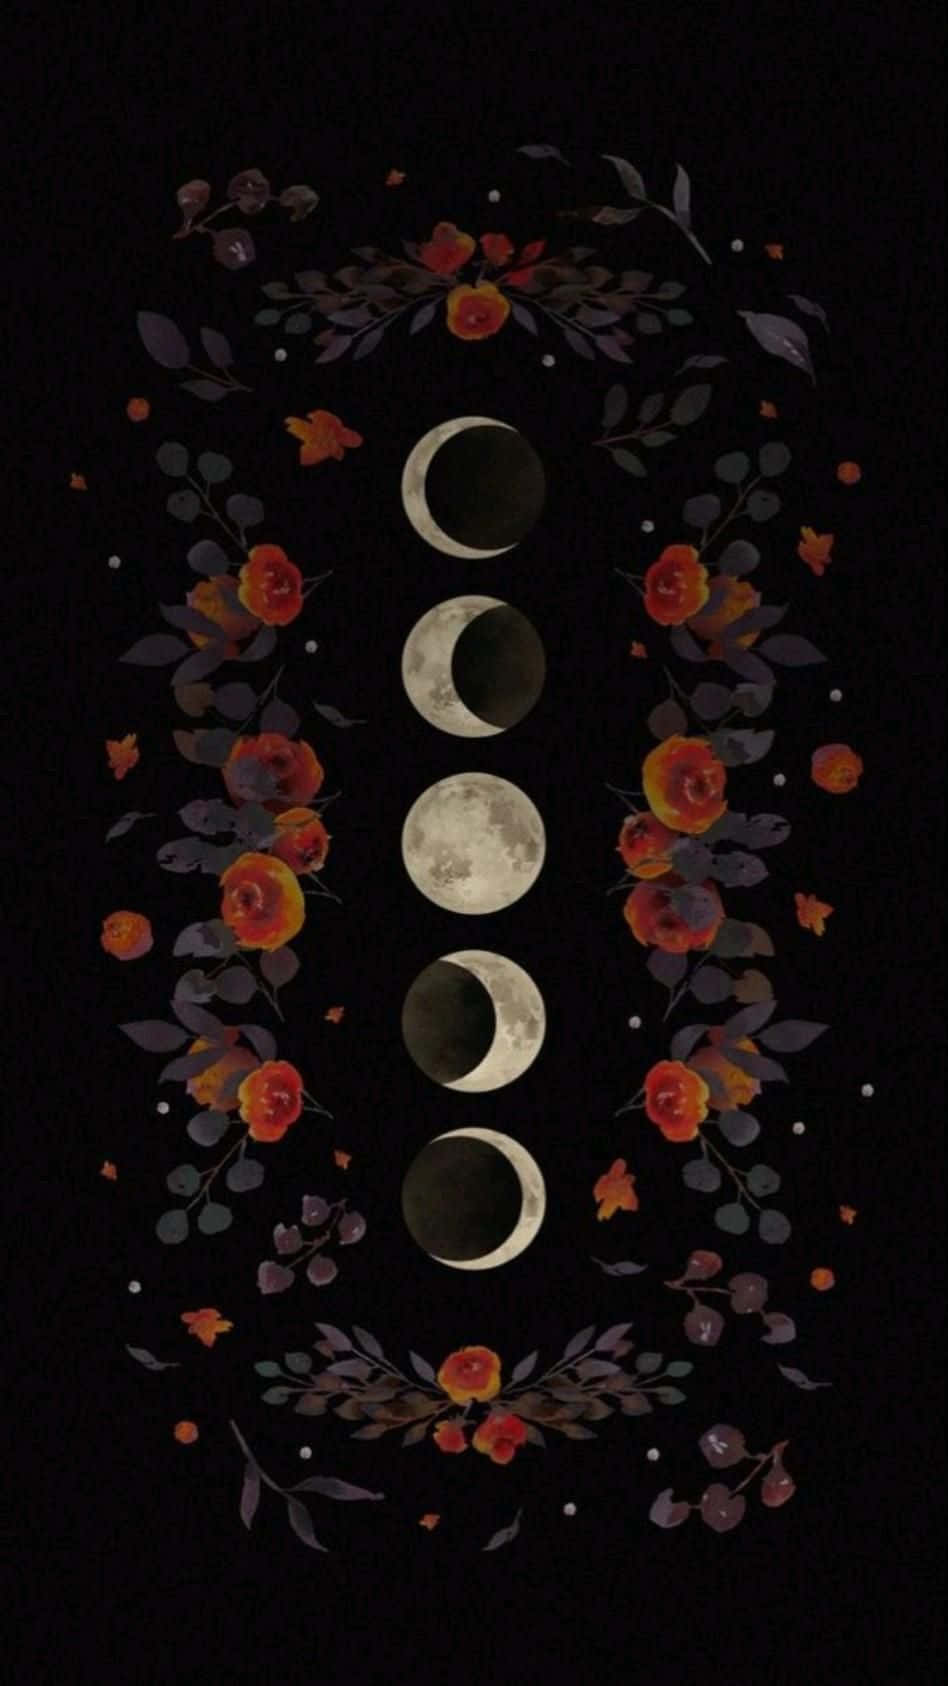 Floral Moon Phases Artwork Wallpaper